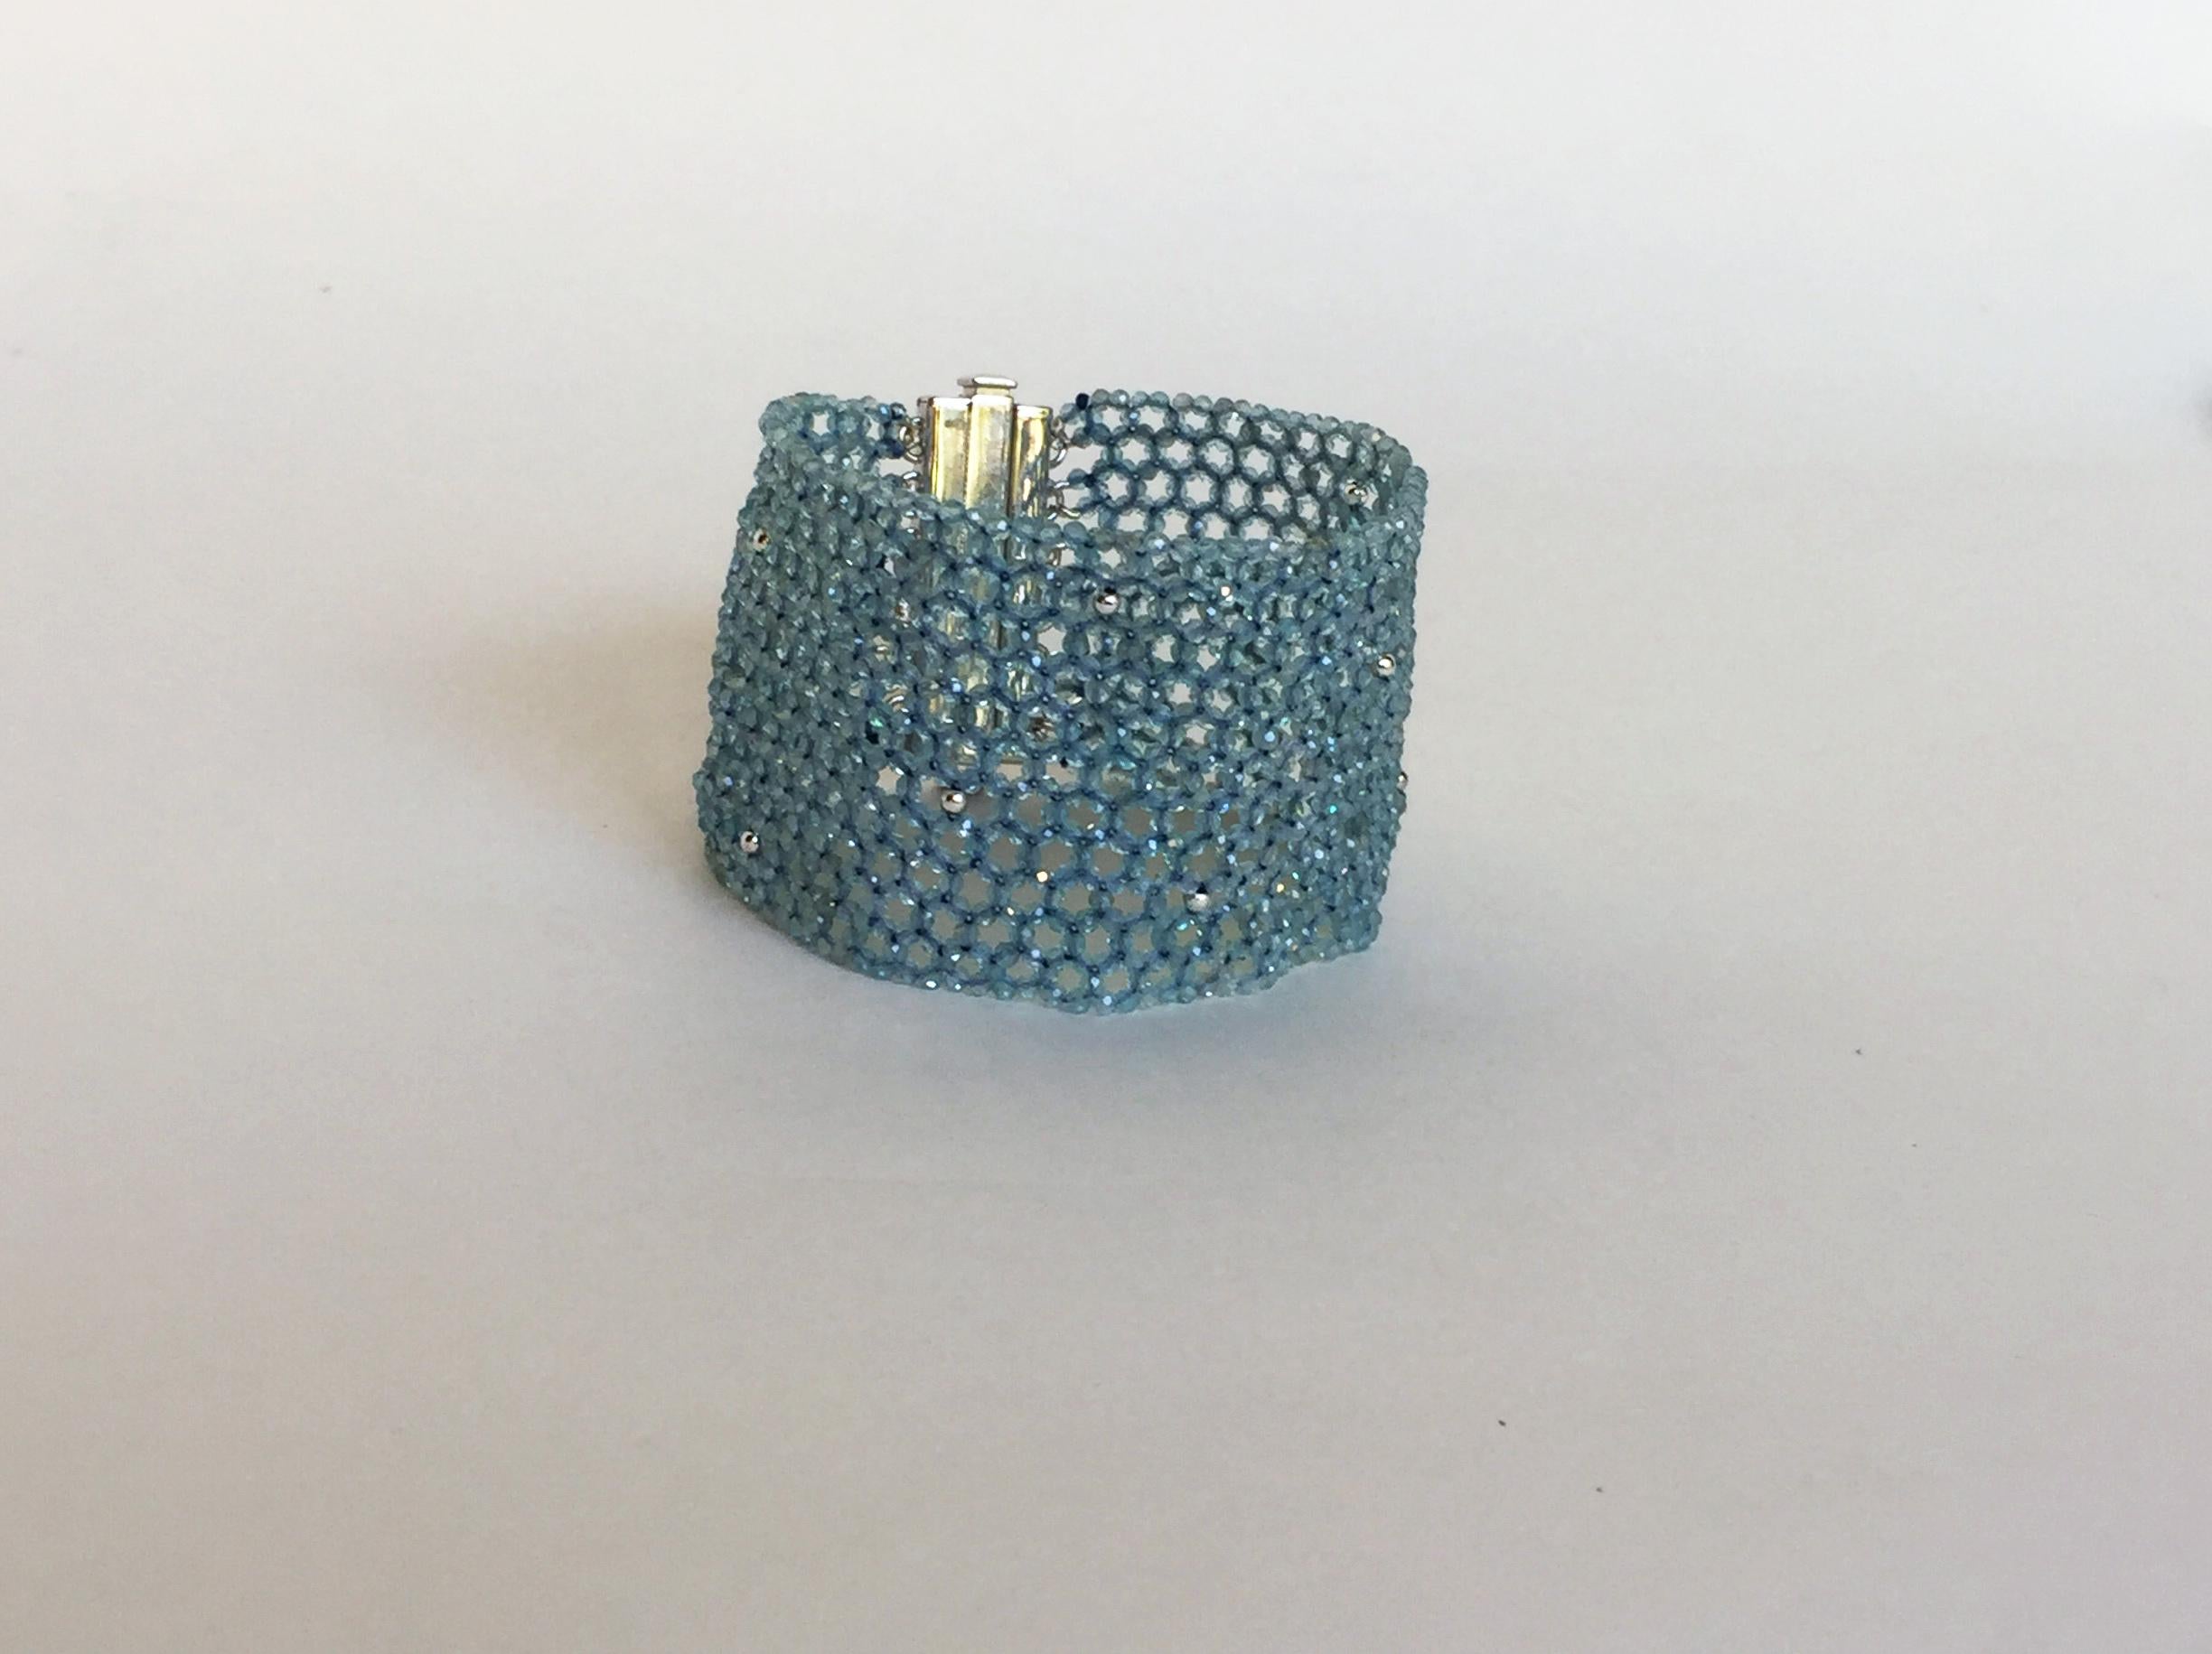 This woven aquamarine and 14k white gold cuff bracelet with sterling silver clasp elegantly drape the wrist like sparkling lace. The faceted baby blue aquamarine and 14k white gold beads are woven into a 1.5-inch wide cuff bracelet. At 6.8 inches